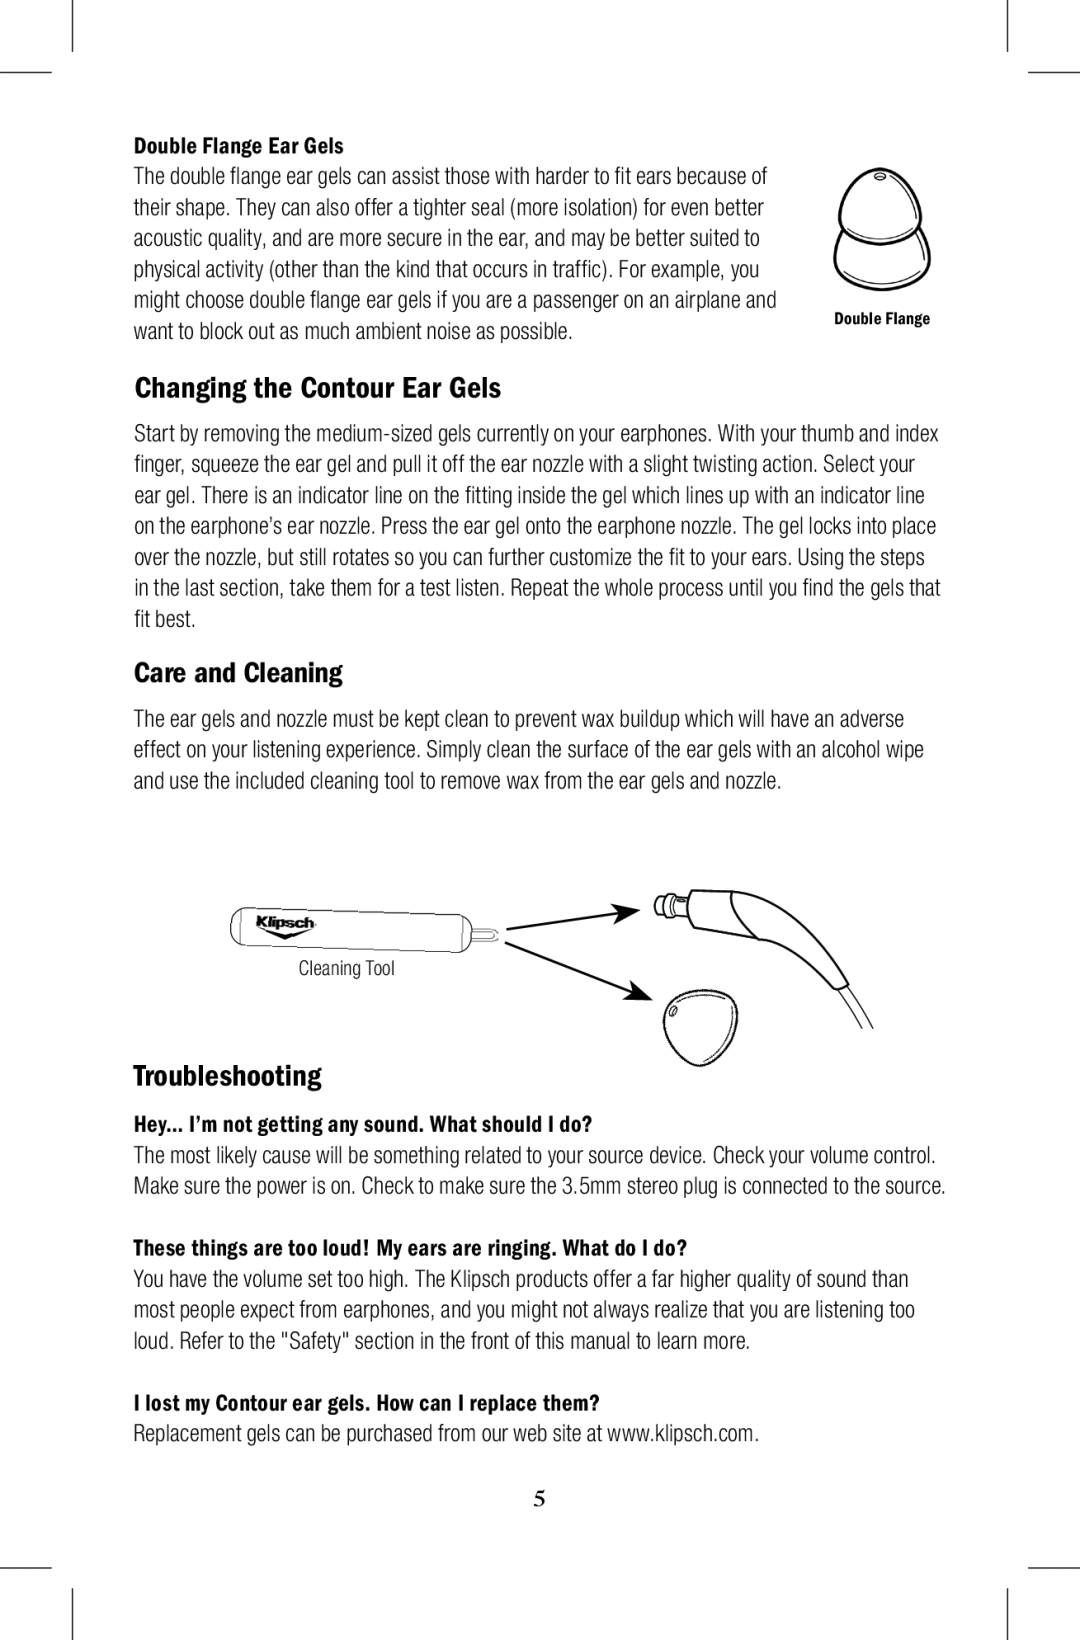 Klipsch Earphones owner manual Changing the Contour Ear Gels, Care and Cleaning, Troubleshooting 